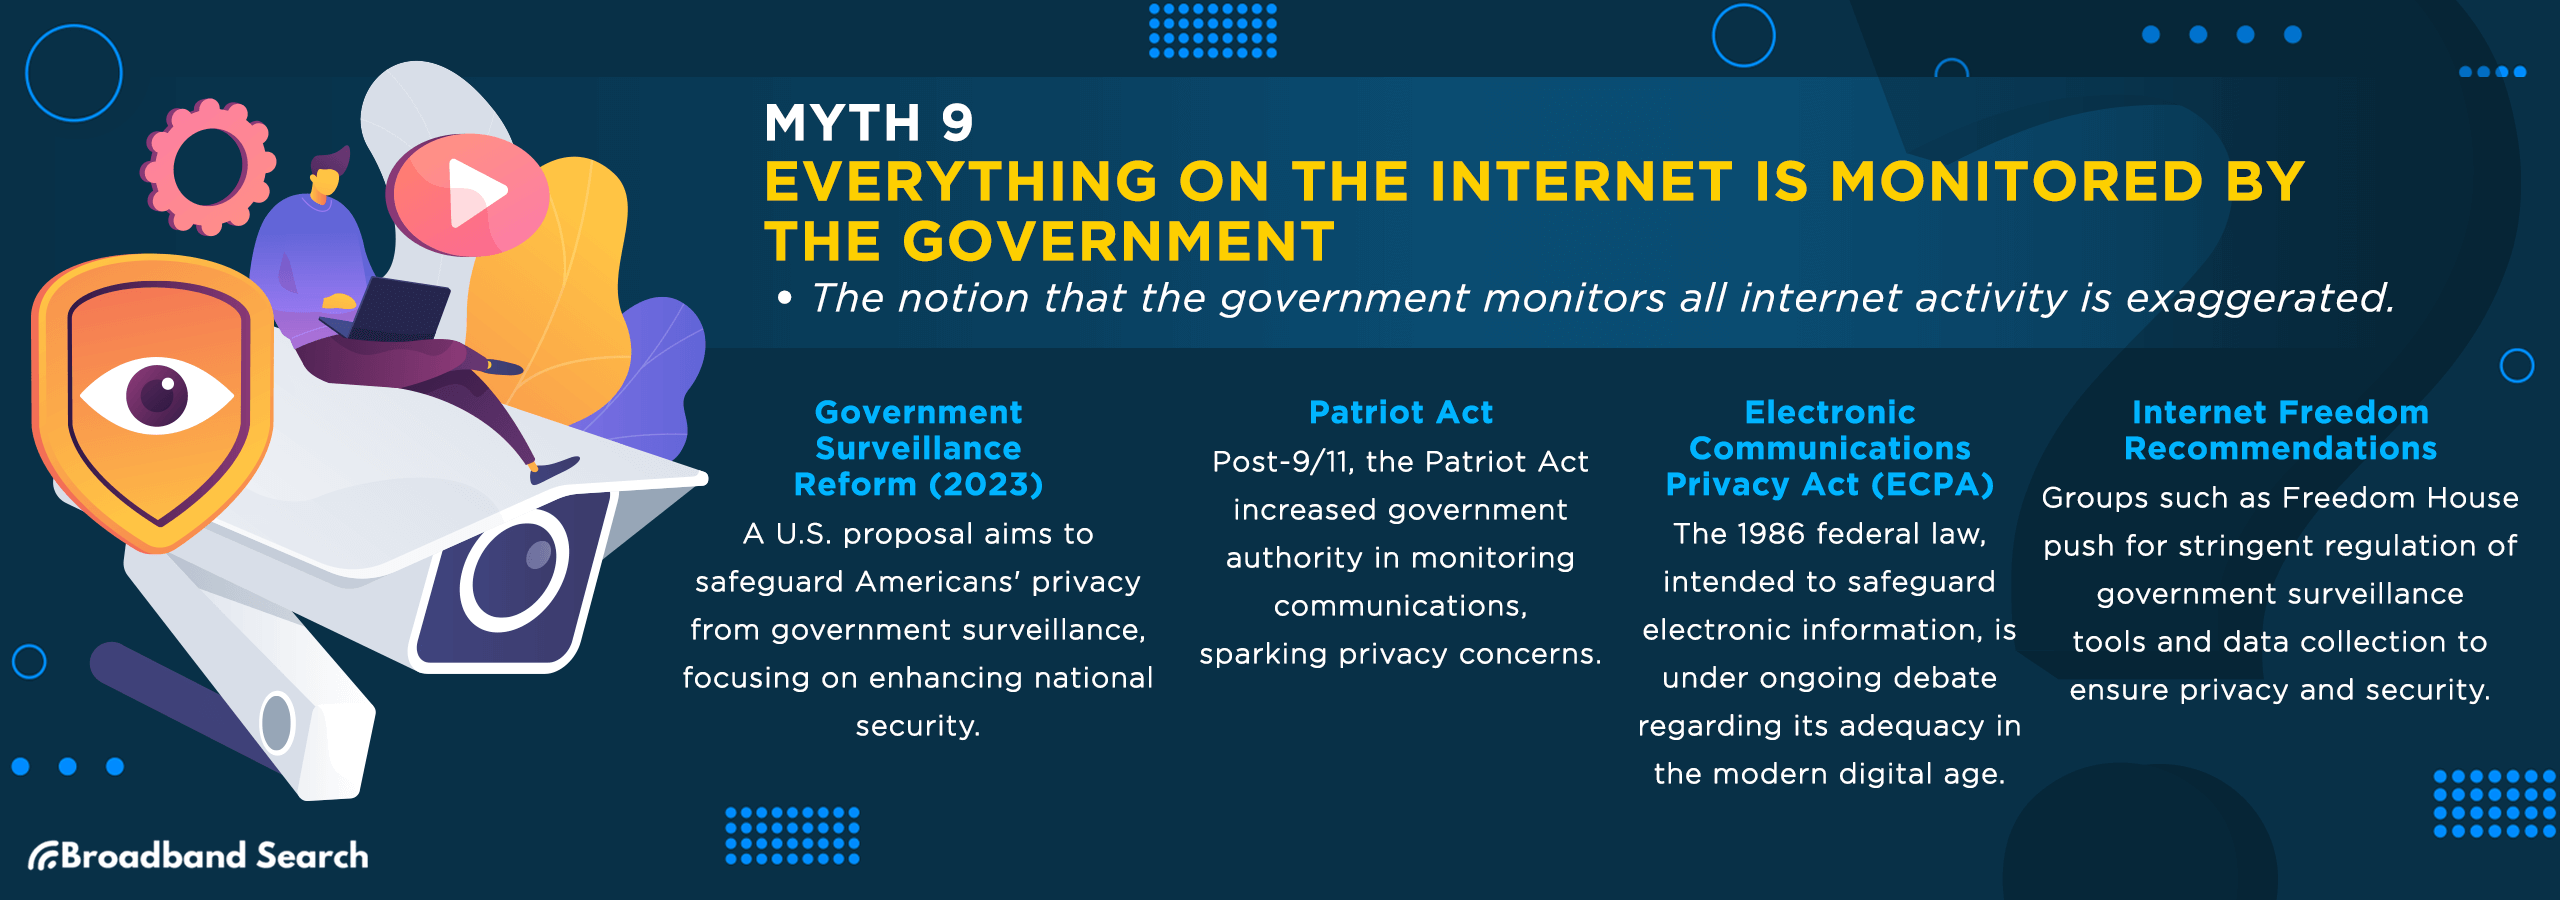 ninth internet myth, everthing on the internet is monitered by the government